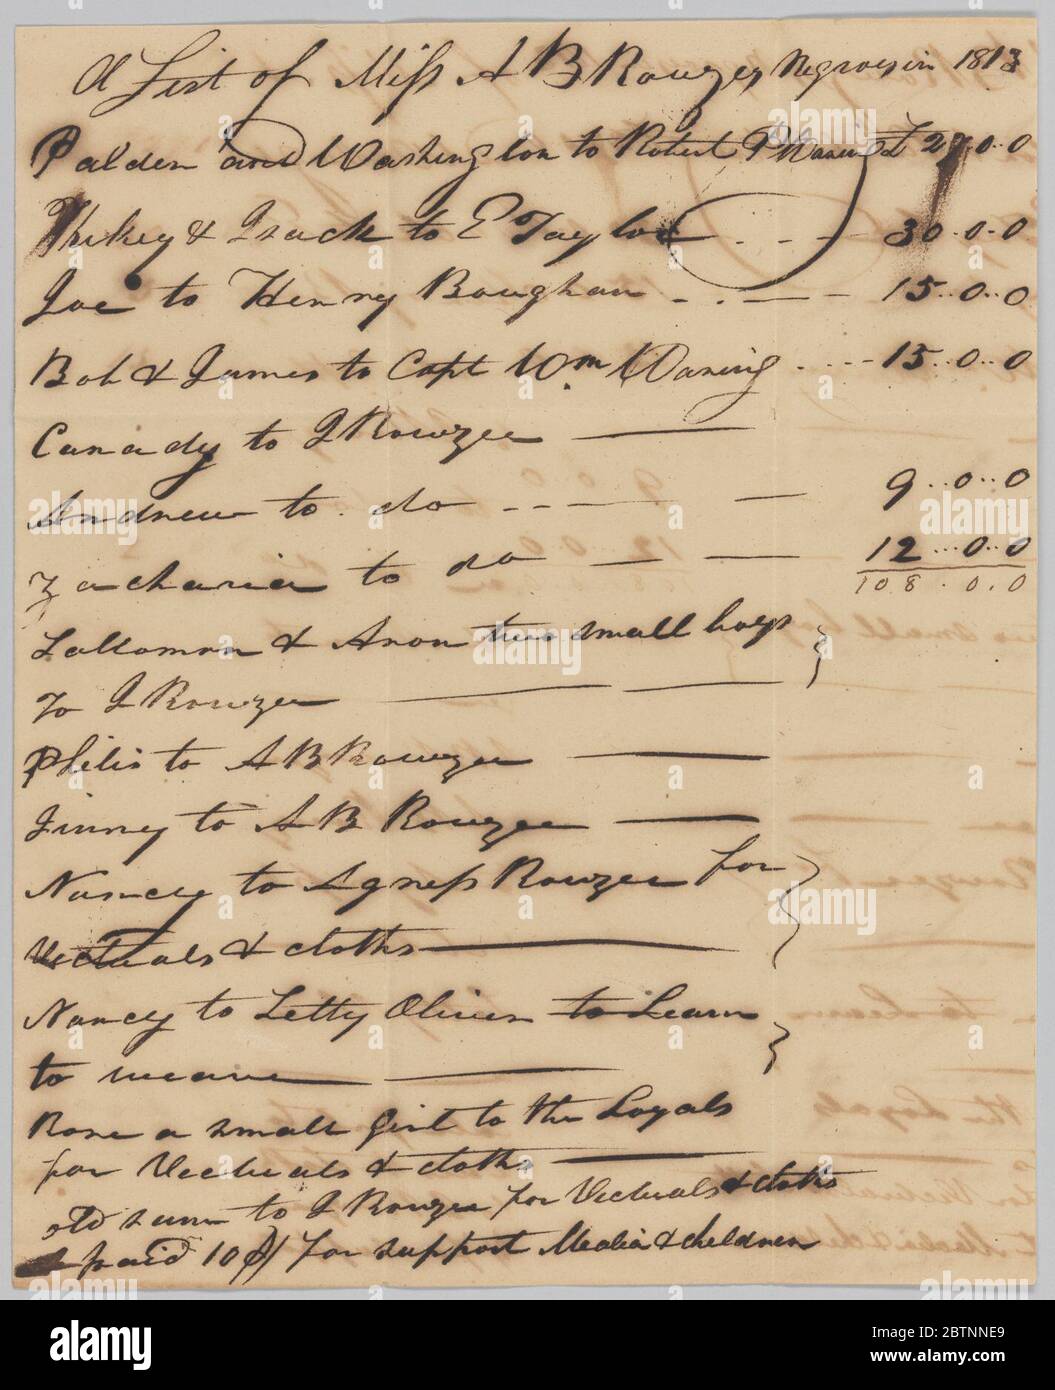 List of enslaved persons hired out by AB Rouzee for the year 1813. This document is from a collection of financial papers related to the plantation operations of several generations of the Rouzee Family in Essex County, Virginia. The papers date from the 1790s through 1860.This document is titled at the top, 'A List of [illegible] A.B. Stock Photo